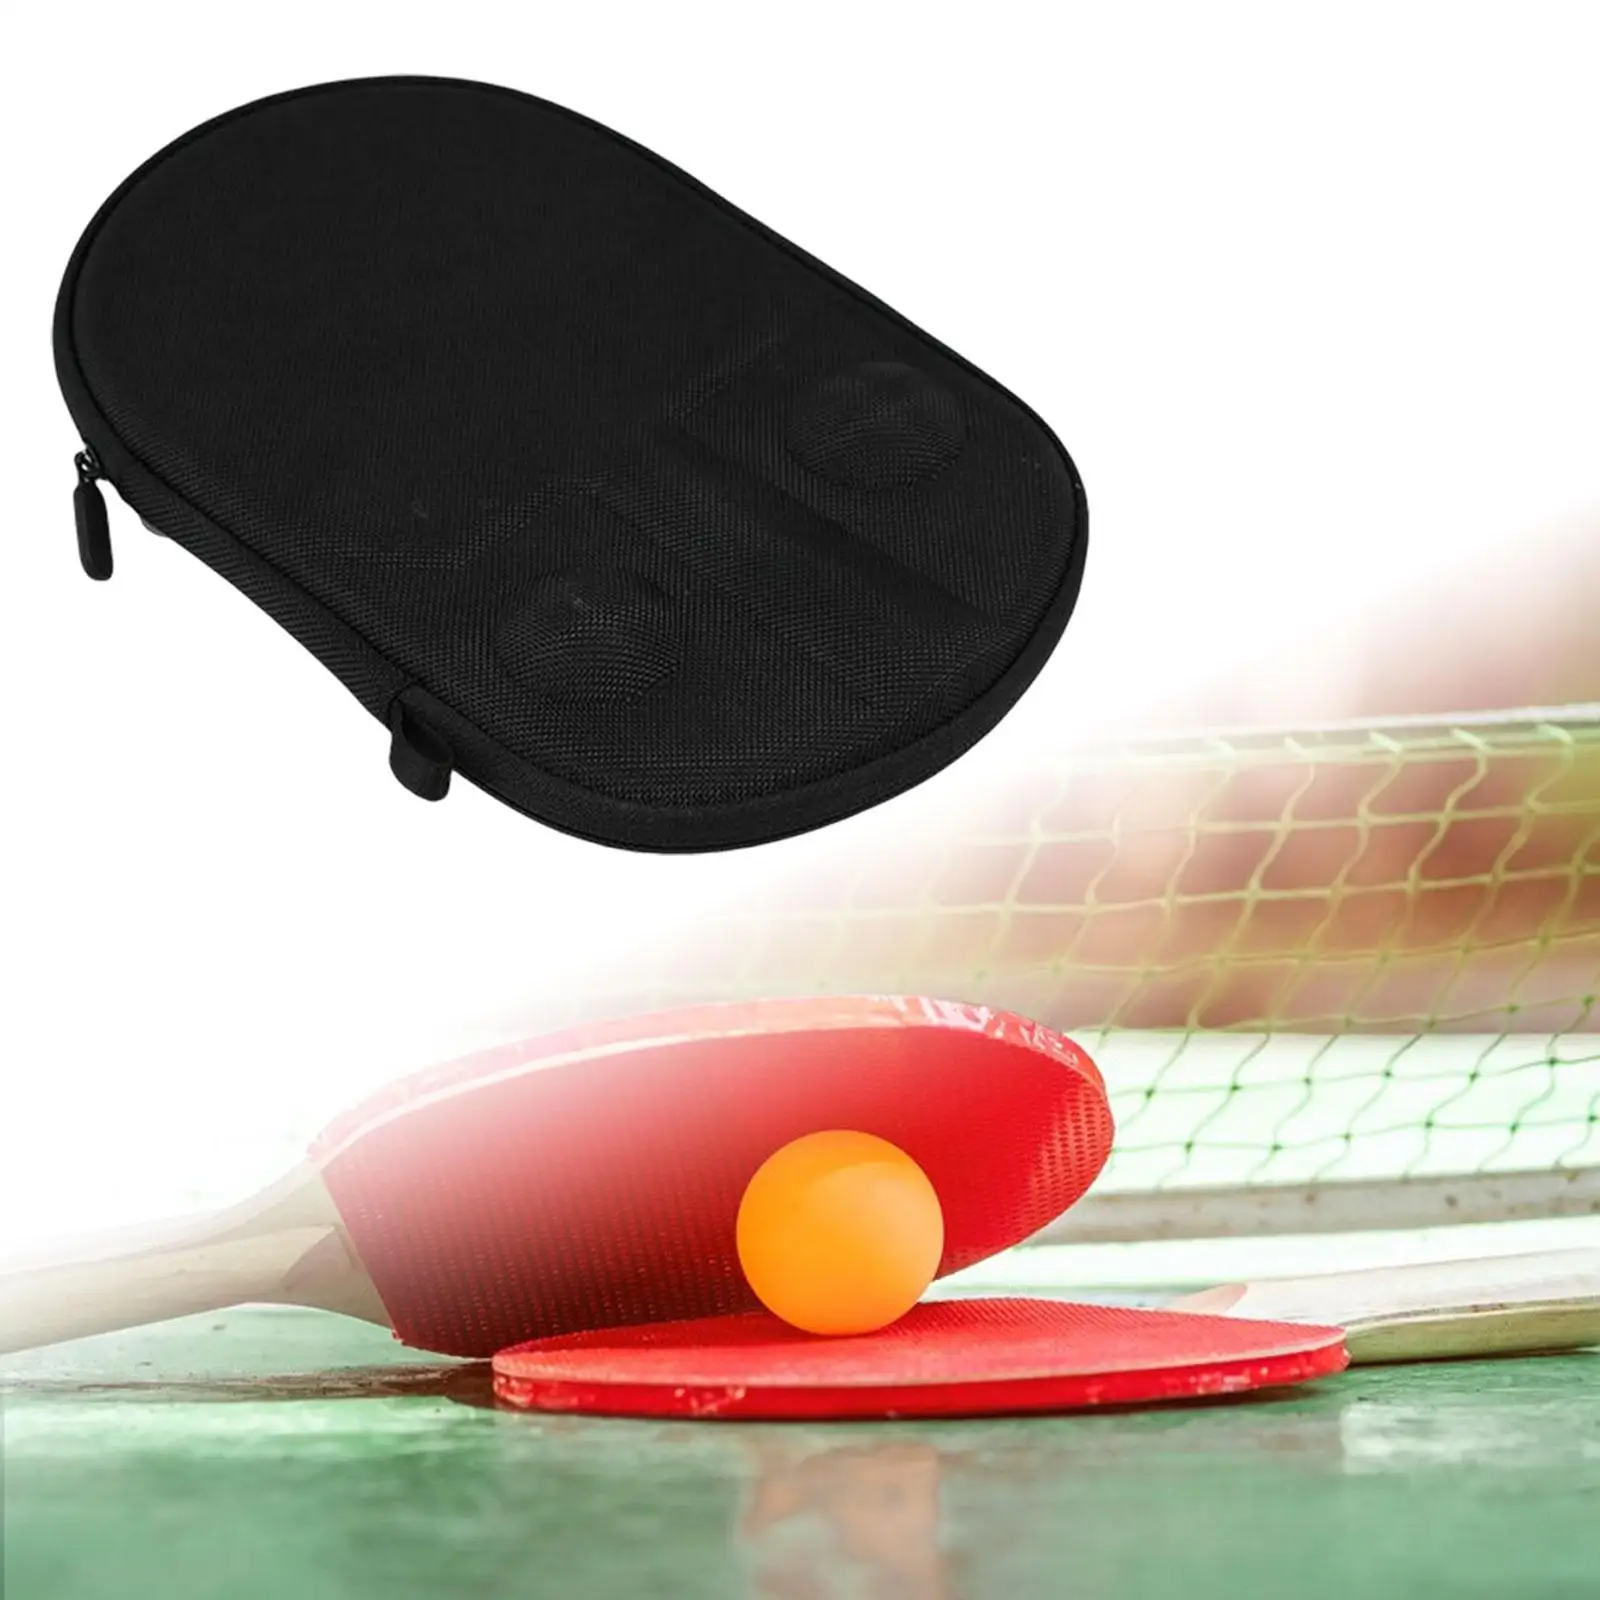 Table Tennis Racket Bag Hold 1 Racket and two balls with Zipper Sturdy for Competition